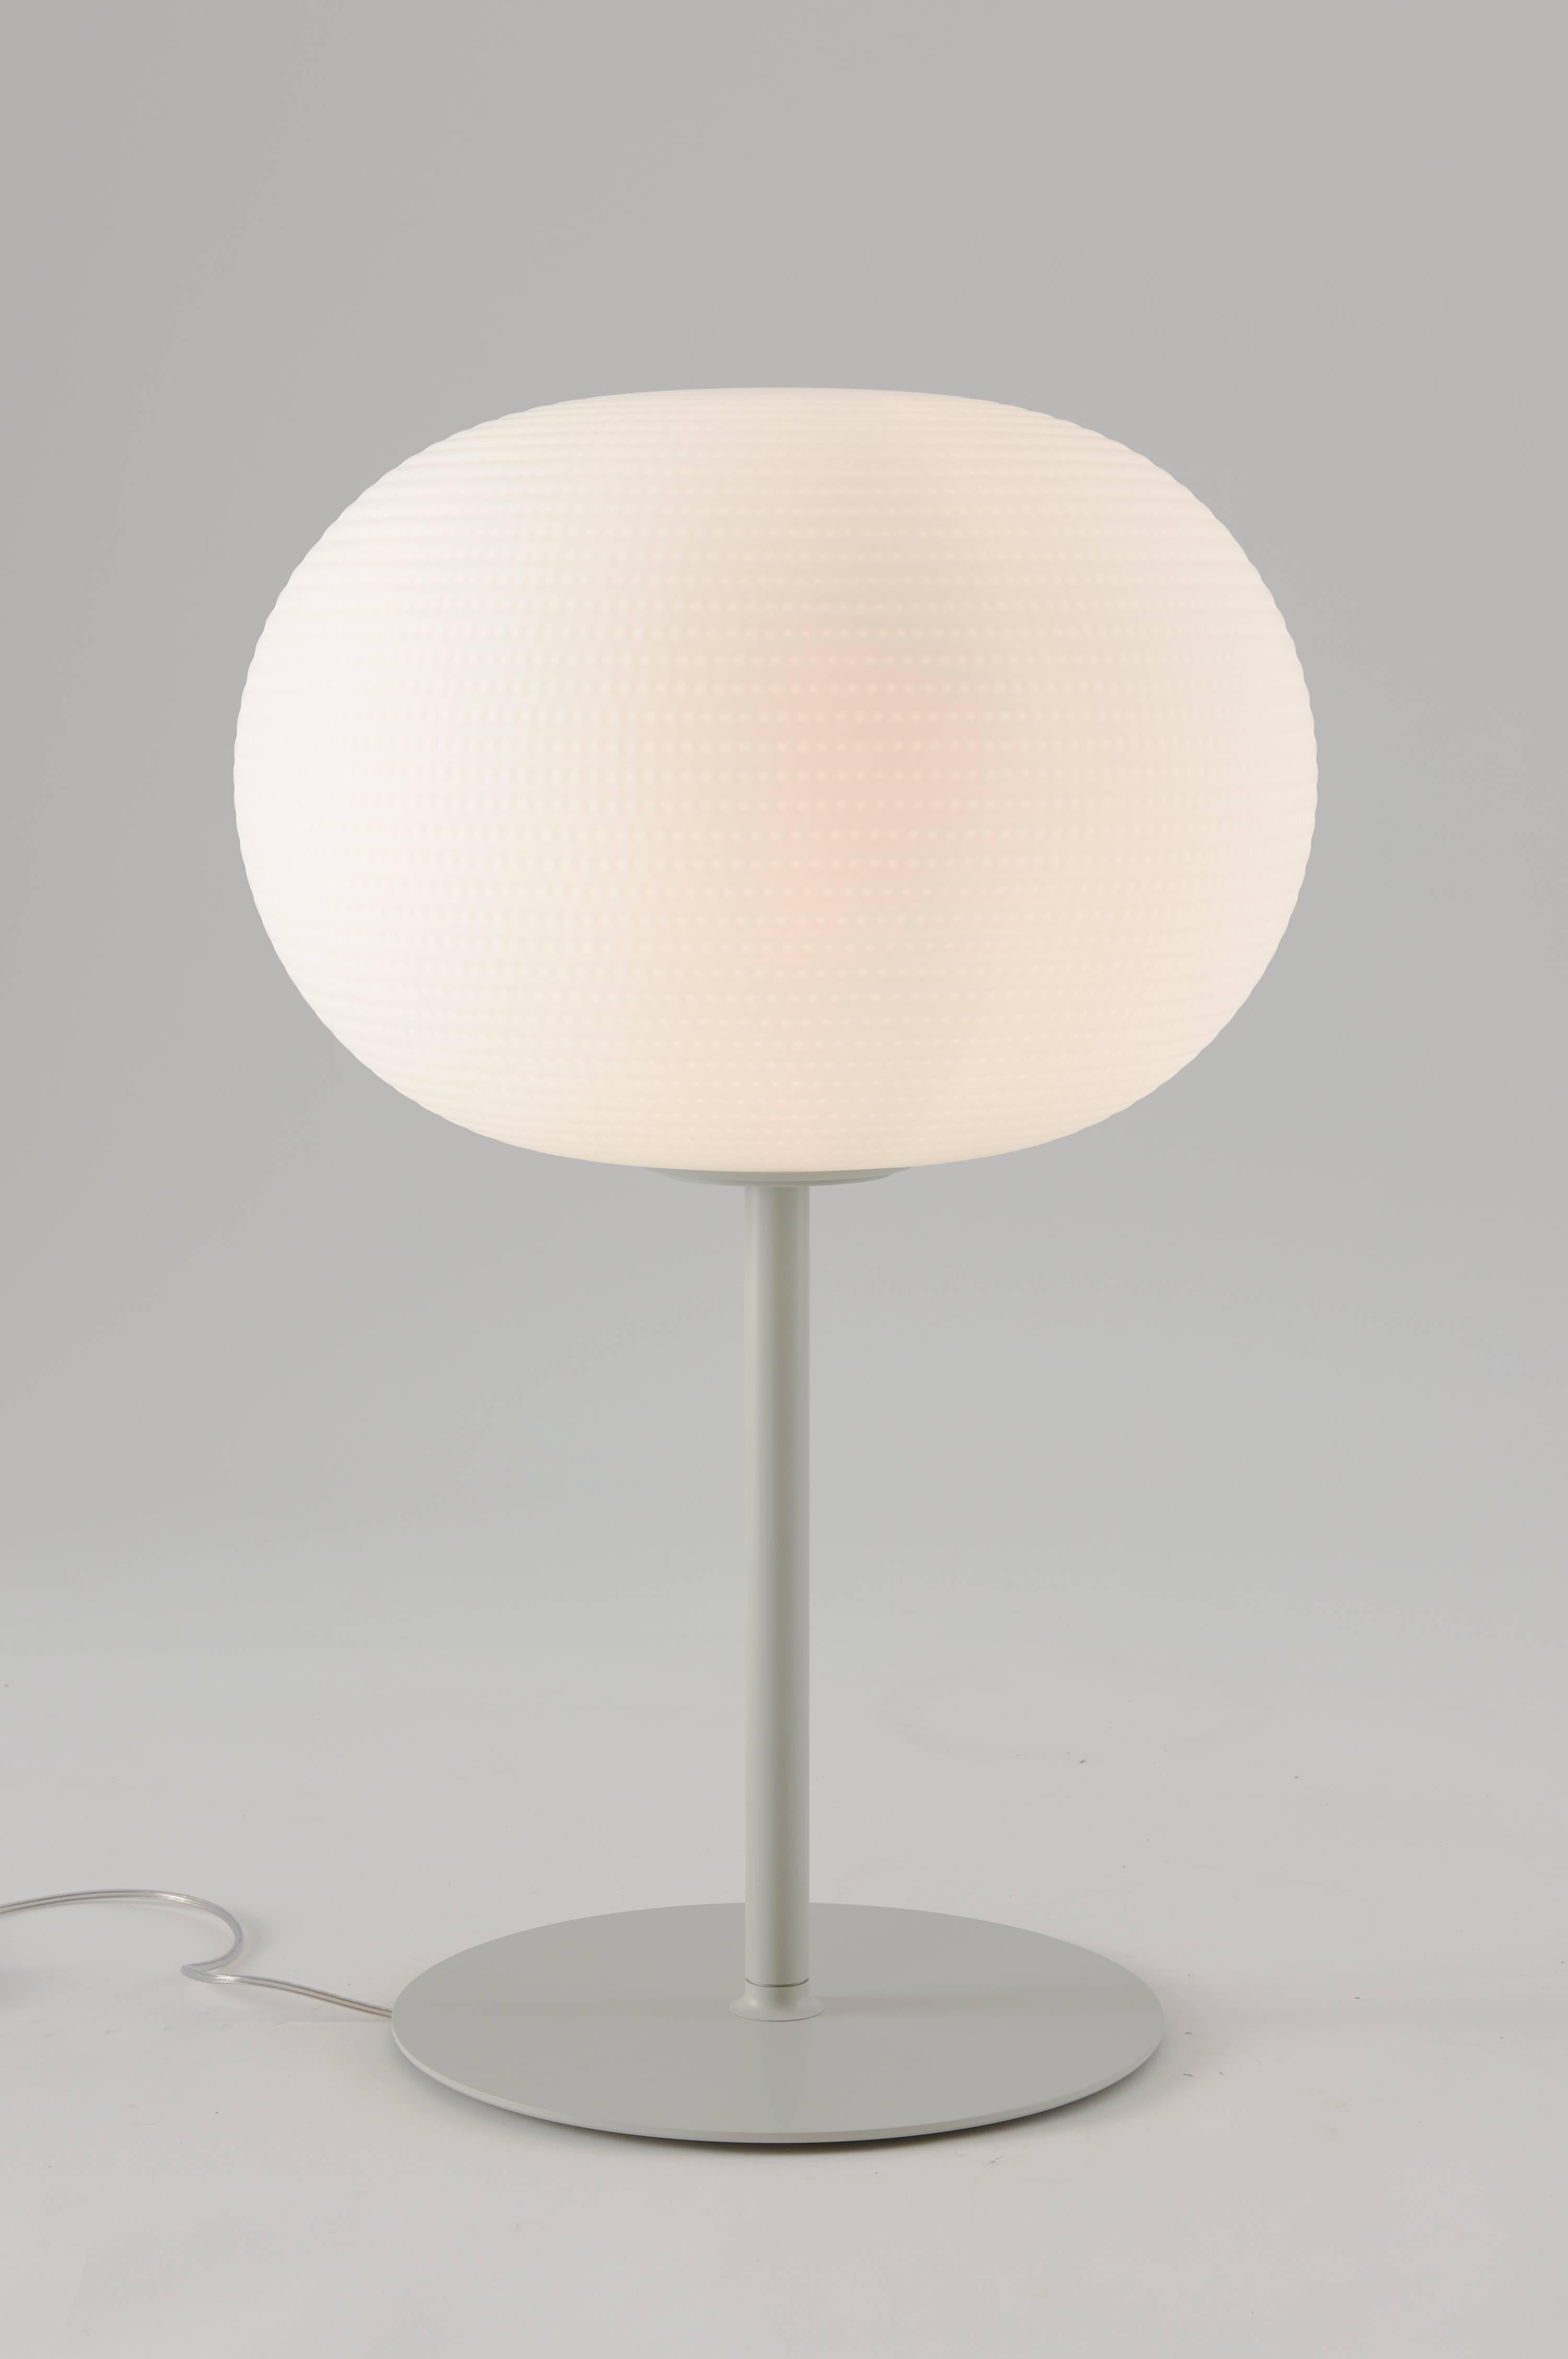 Bianca medium table lamp with stem by Matti Klenell from Fontana Arte. 

Its beautifully balanced shape is enriched and made unique by an orderly series of delicate, light grooves that, on the white volume of the glass, look like tiny prints on